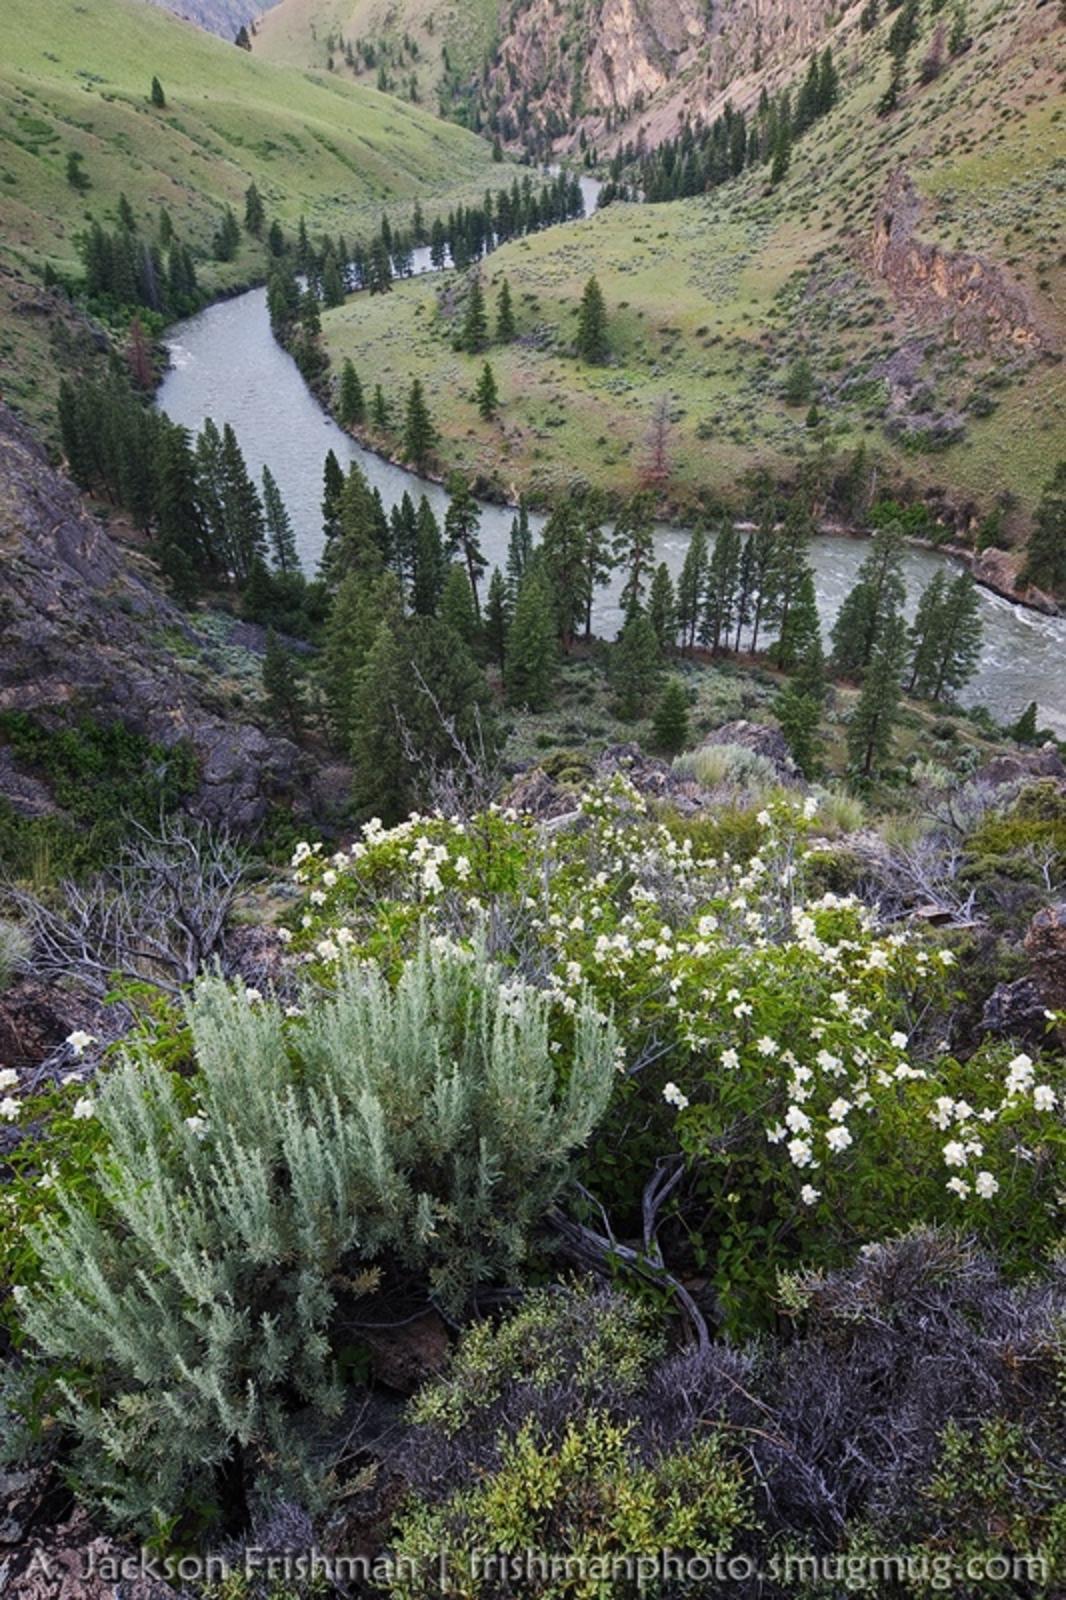 Blooming syringa above the Middle Fork of the Salmon, Idaho. Photo by Jackson Frishman